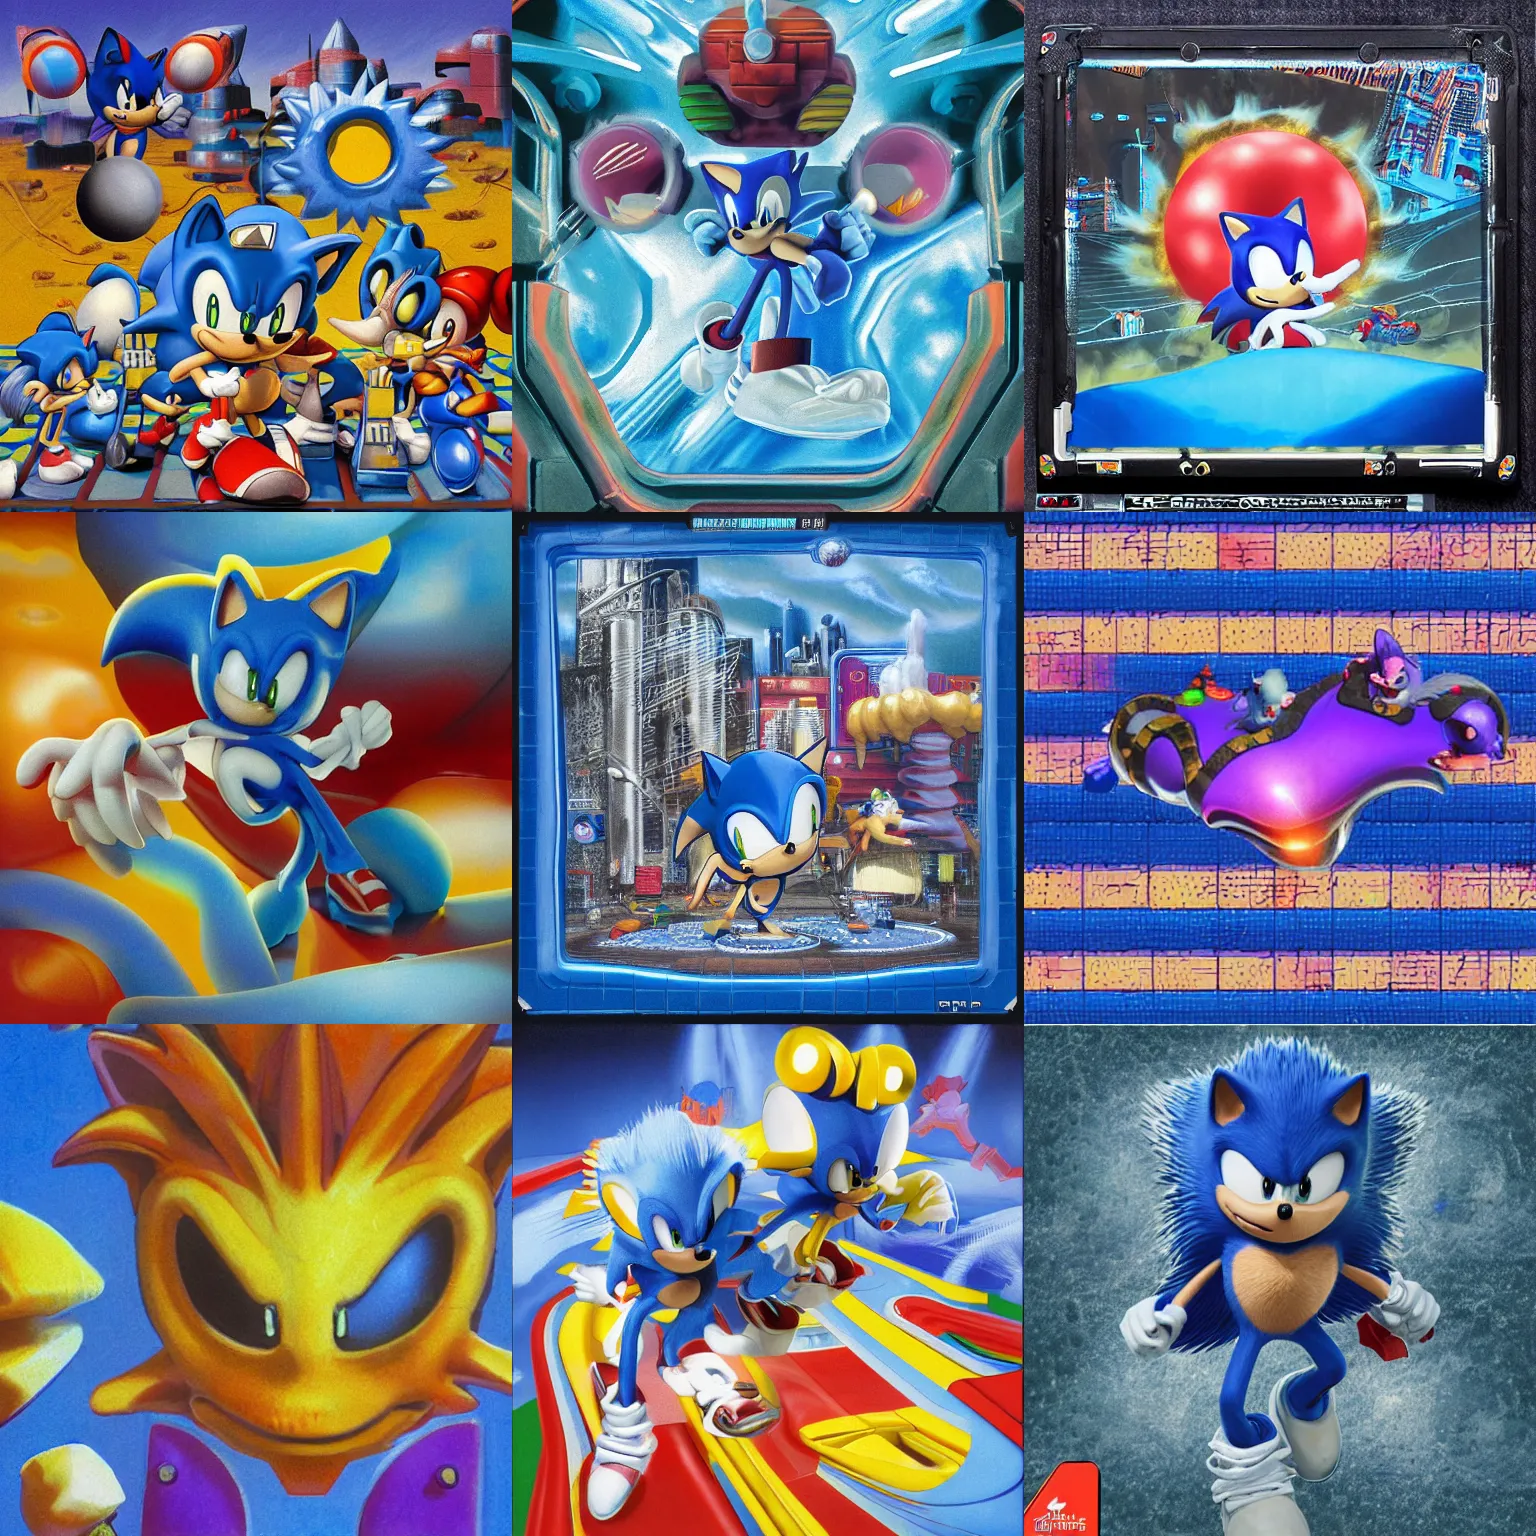 Prompt: sonic hedgehog portrait deconstructivist claymation scifi matte painting lowbrow tongue surreal sonic hedgehog, retro moulded professional soft pastels high quality airbrush art album cover of a liquid dissolving airbrush art tongue sonic the hedgehog swimming through dreams blue fisheye checkerboard background 1 9 9 0 s 1 9 9 2 sega genesis video game album cover